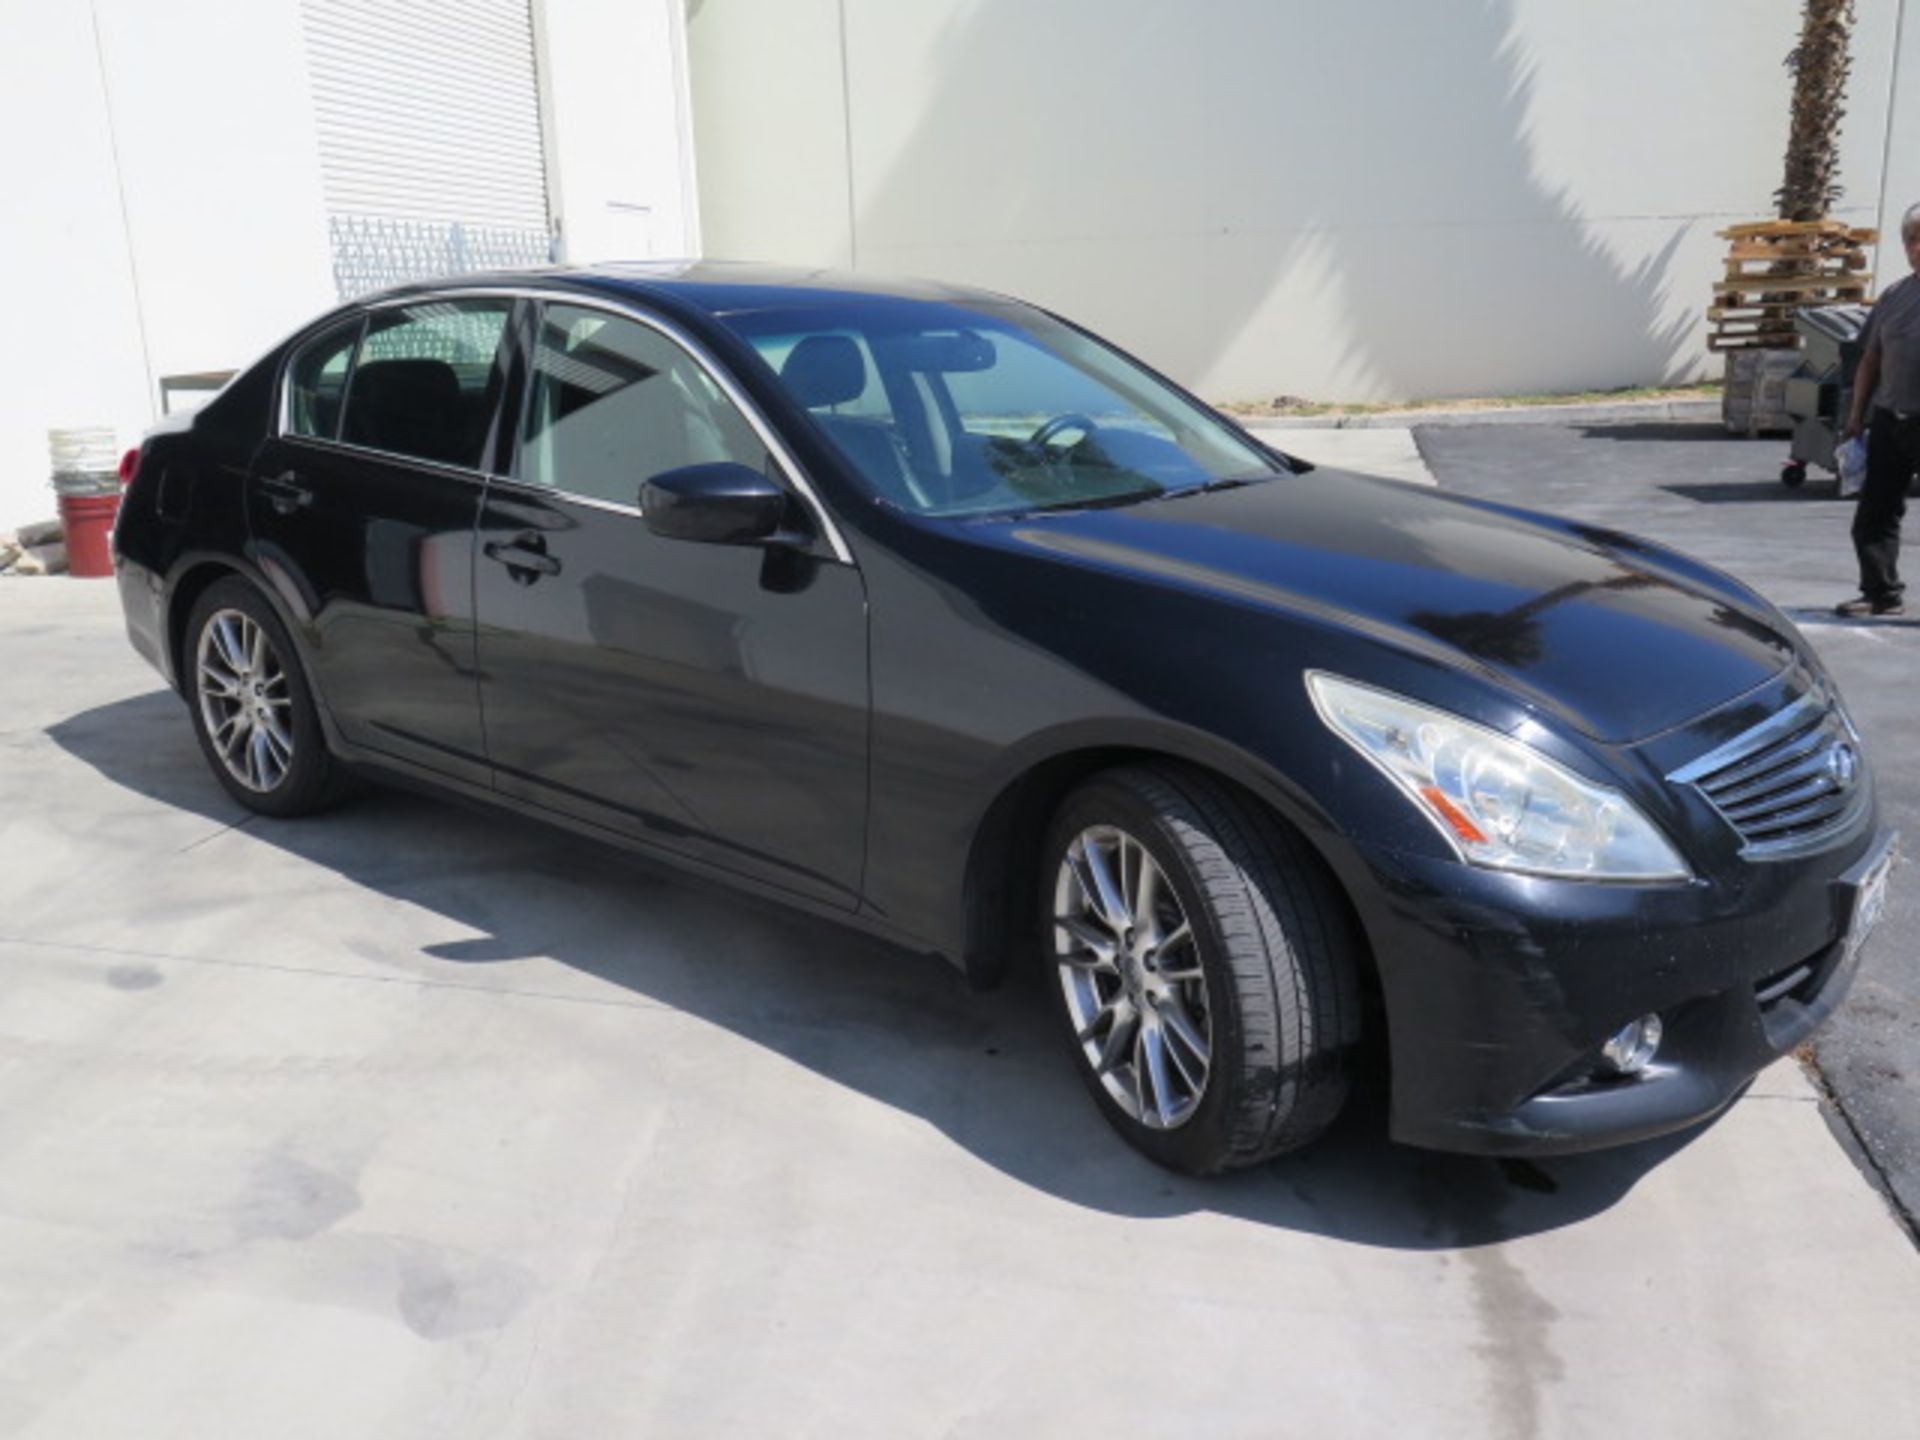 2010 Infinity G37 Lisc# 6KKE924 w/ Rebuilt Gas Engine, Automatic Trans, AC, 133K Miles, SOLD AS IS - Image 3 of 27